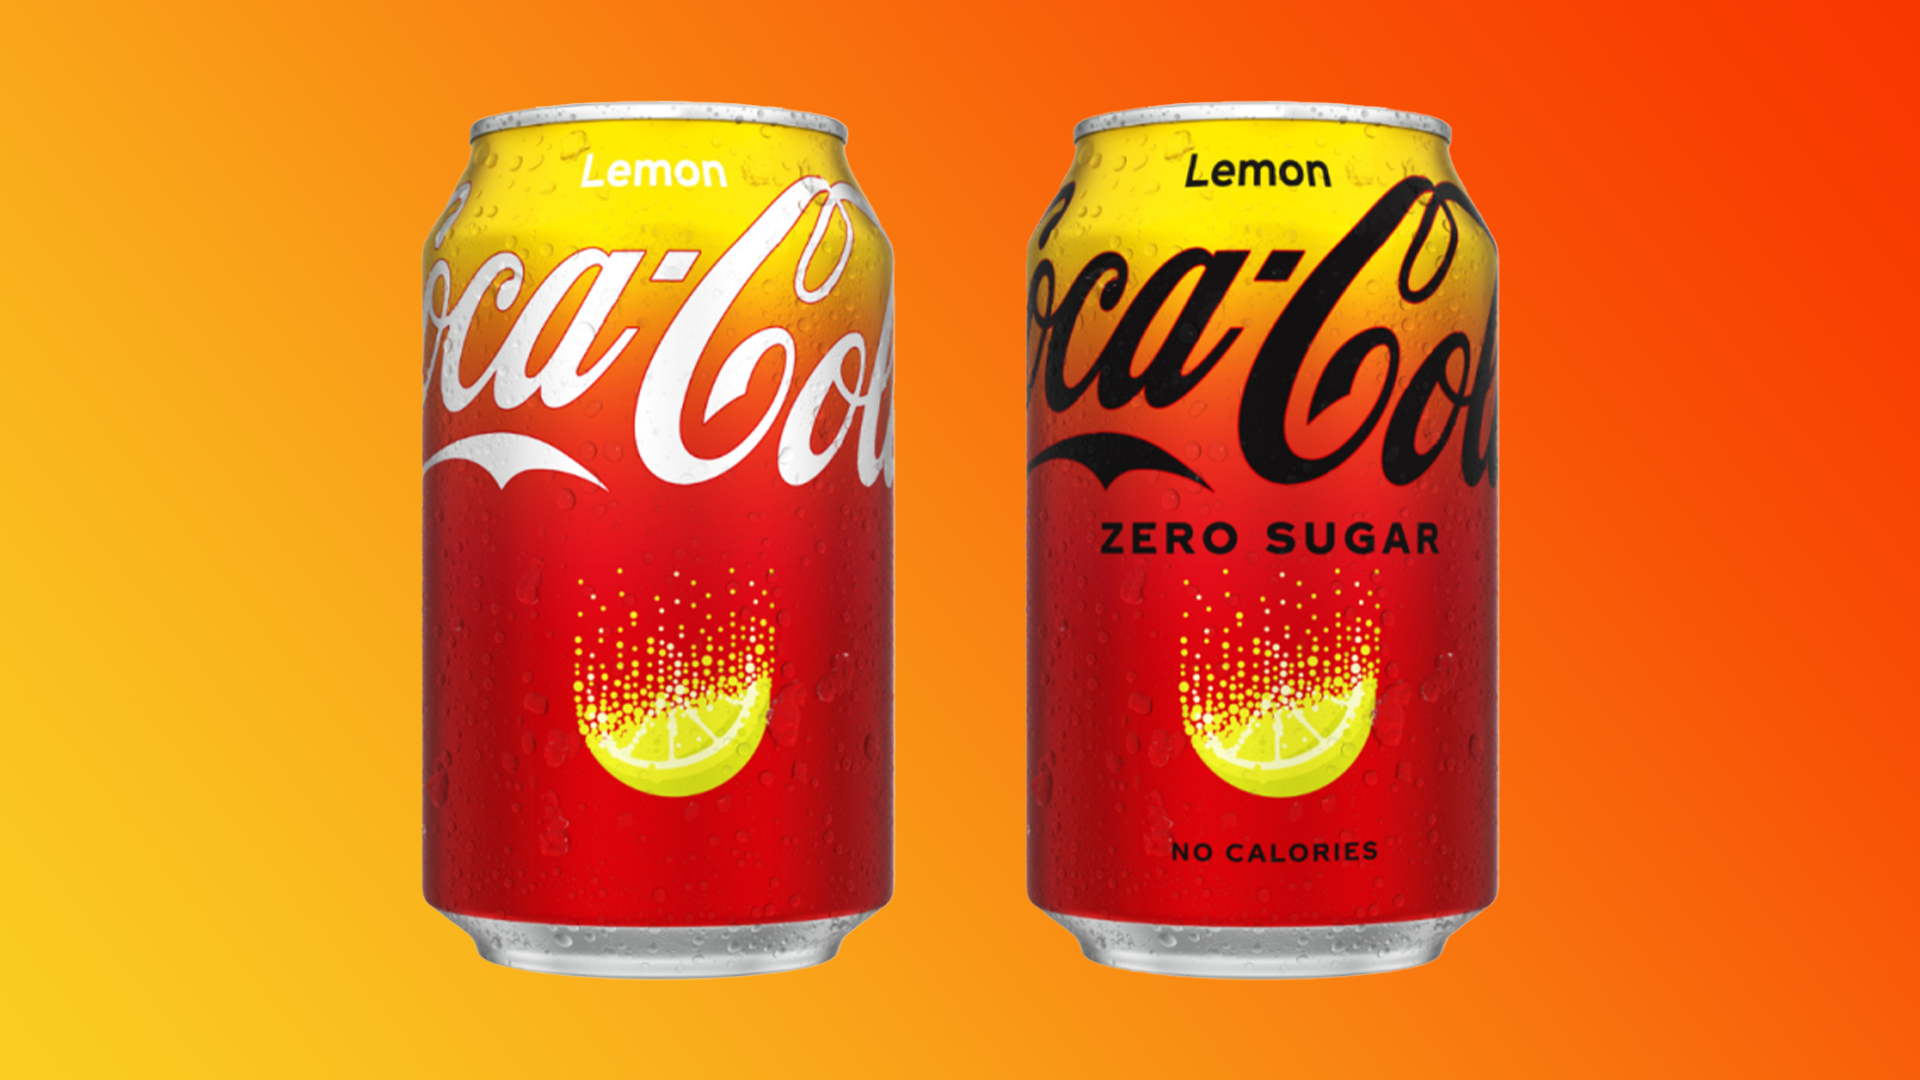 Coca-Cola With Lemon Is Back for Folks That Hate Adding an Actual Slice of Lemon to Their Coke